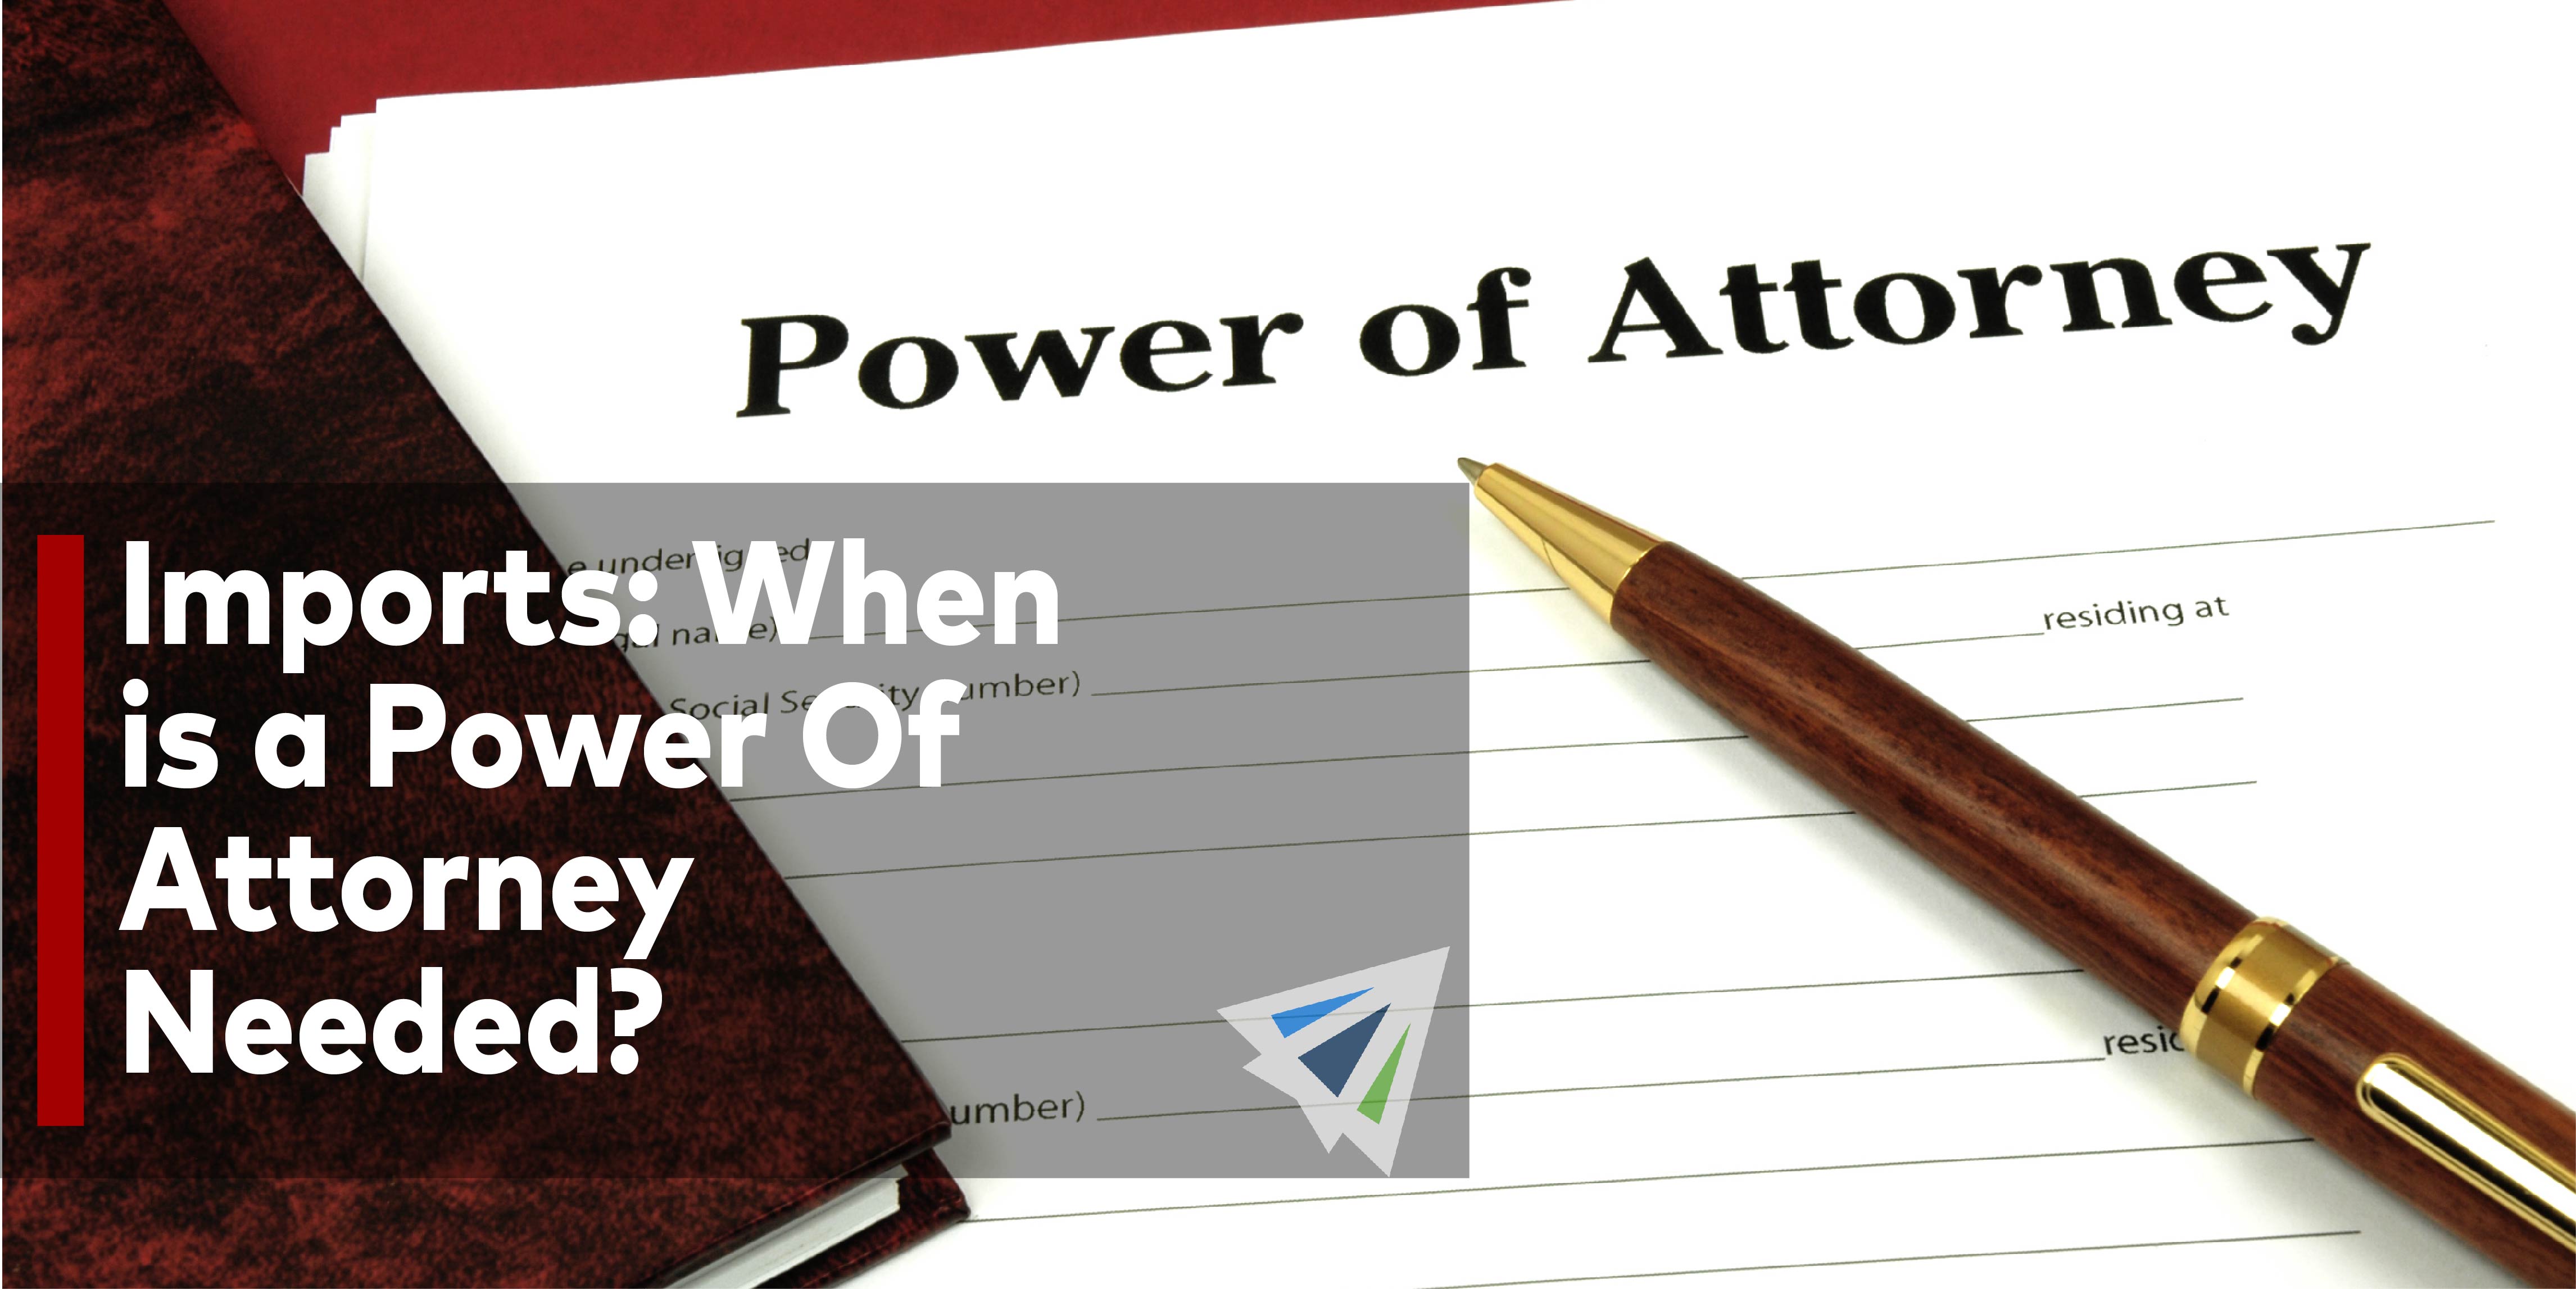 Imports: When is a Power Of Attorney Needed?